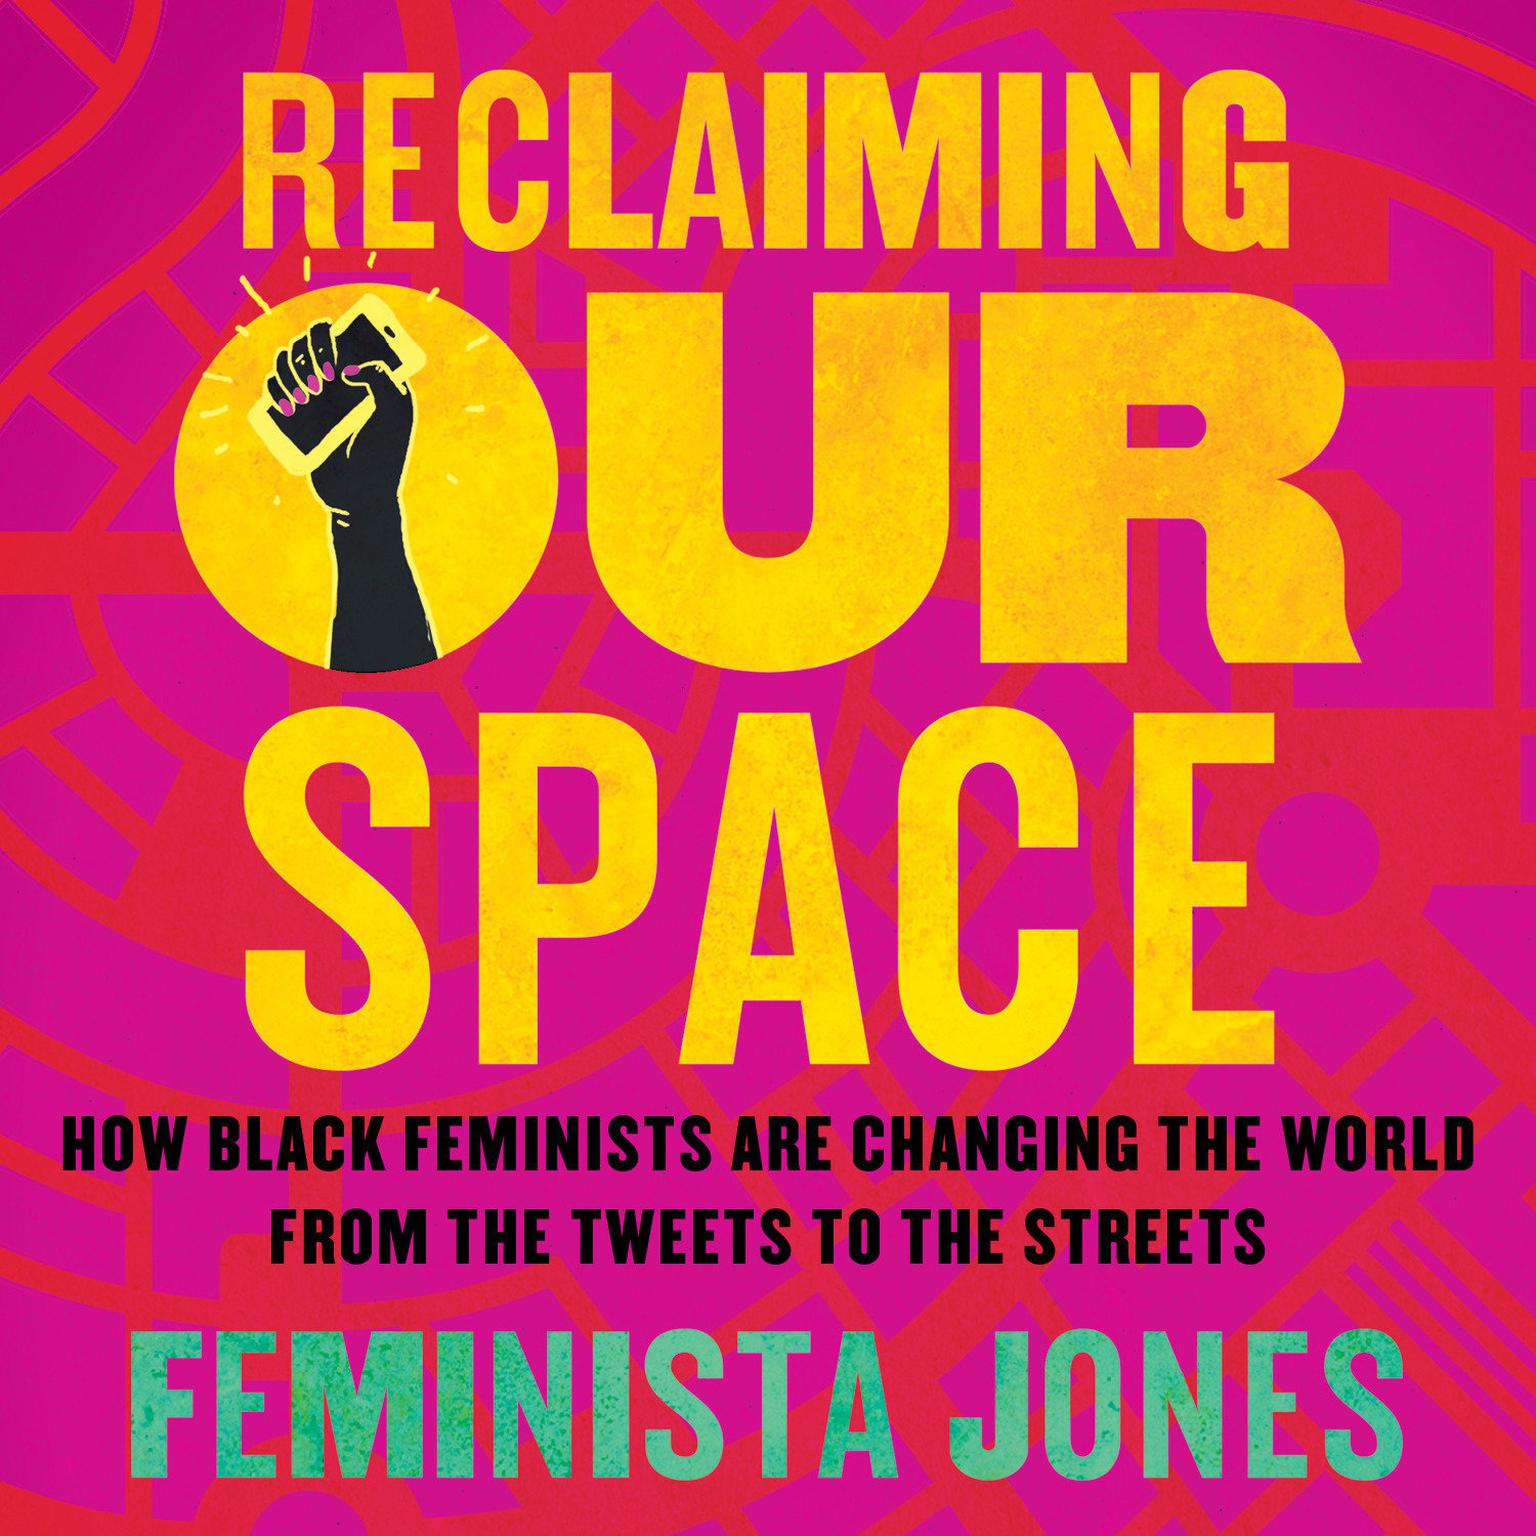 Reclaiming Our Space: How Black Feminists Are Changing the World from the Tweets to the Streets Audiobook, by Feminista Jones